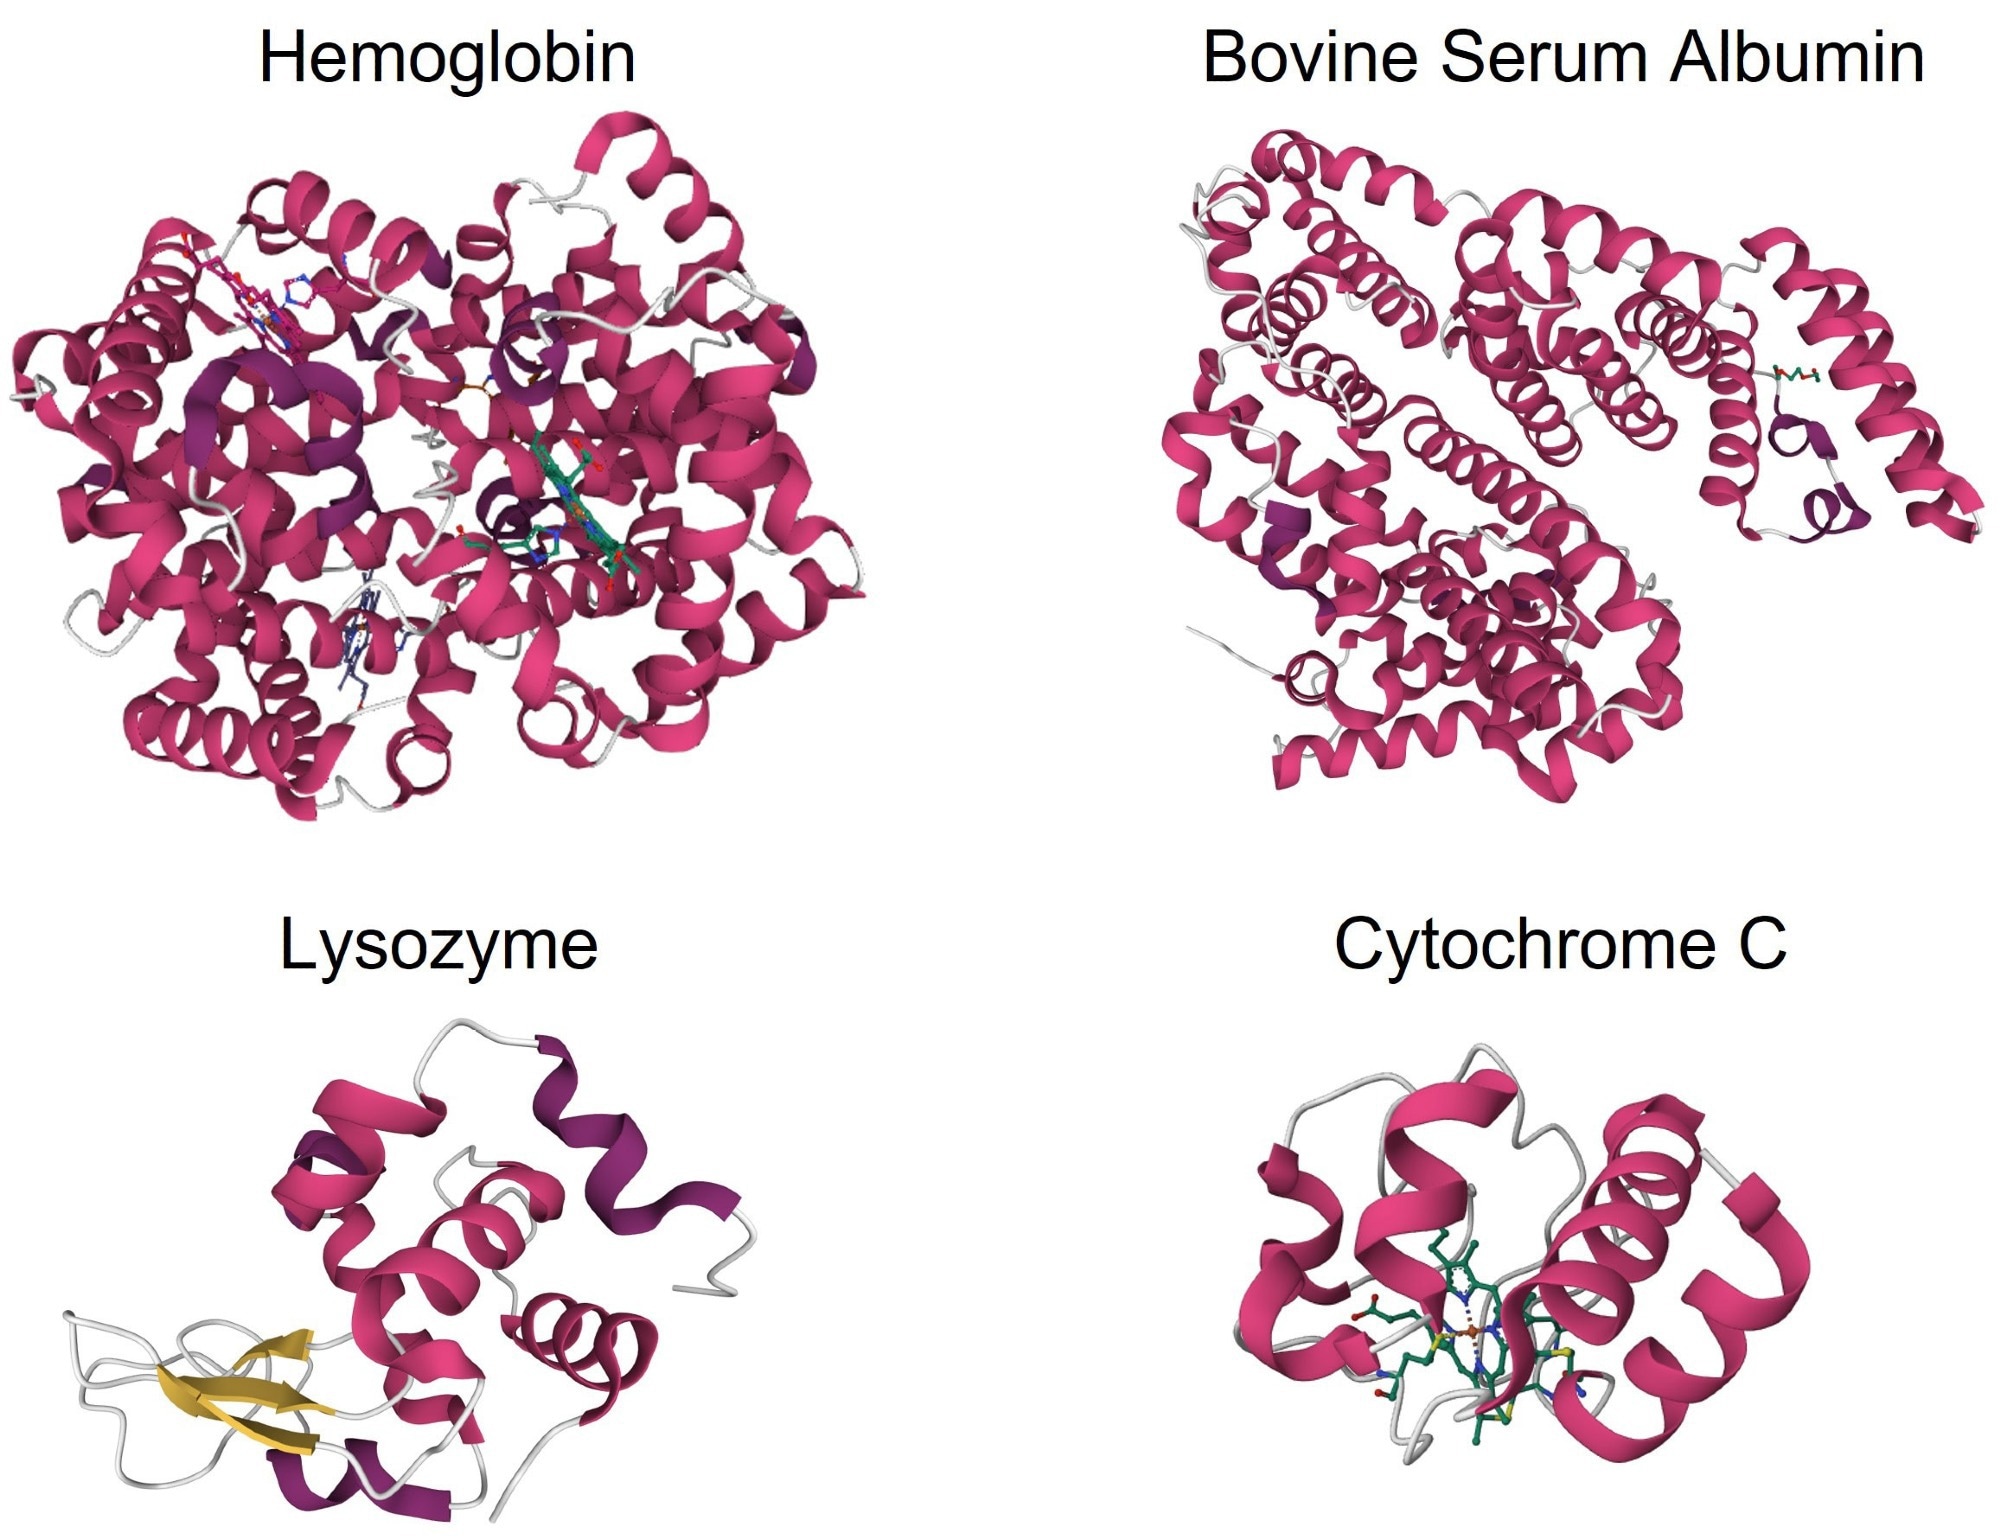 Crystal structures of α-helix-rich proteins: hemoglobin (PDB: 2QSS), BSA (PDB: 3V03), lysozyme (PDB: 1DPX), and cytochrome C (PDB: 1HRC).